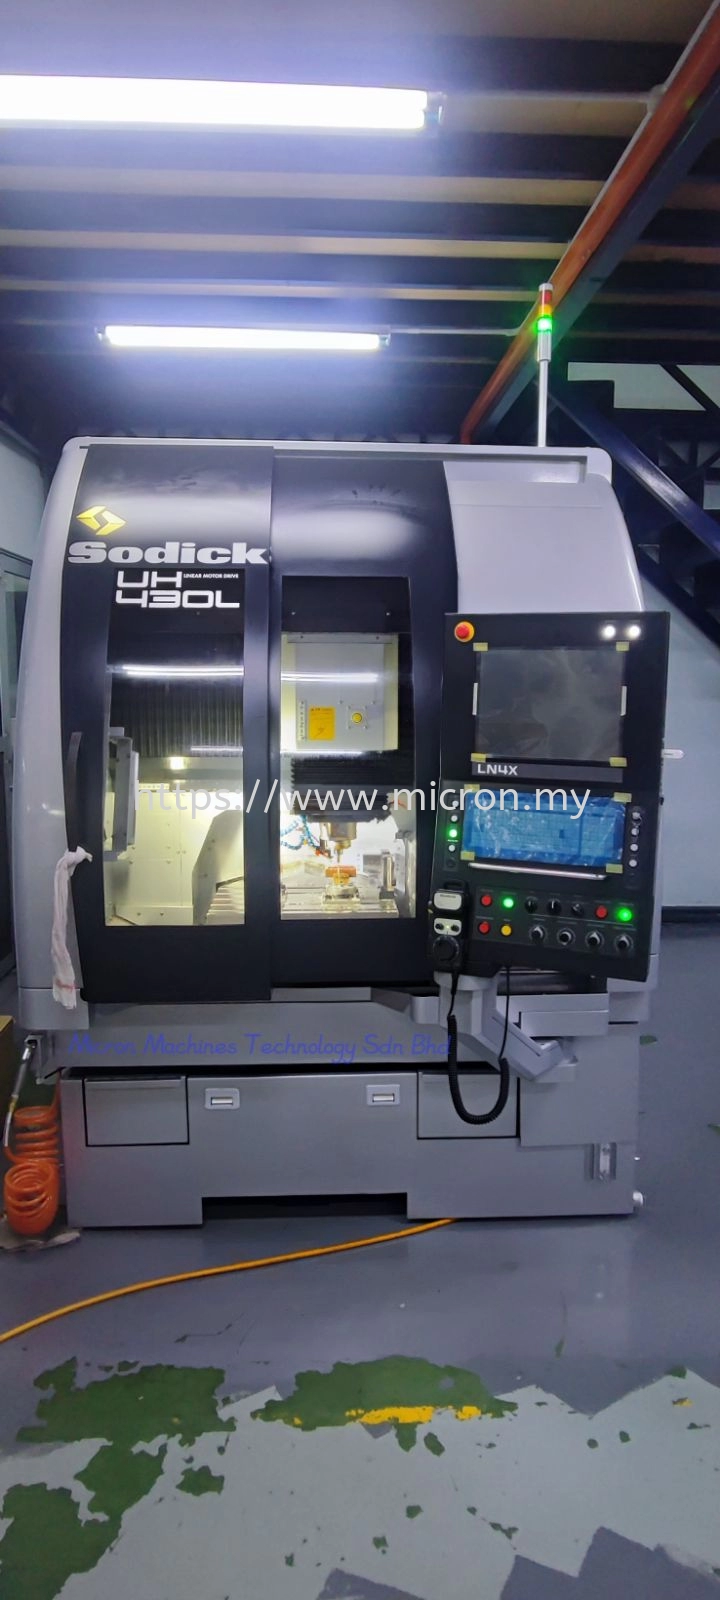 2units of Ultra Precision High Speed CNC Milling was delivered to manufacturer of high precision engineering mainly in semiconductor industry which is located at Muar